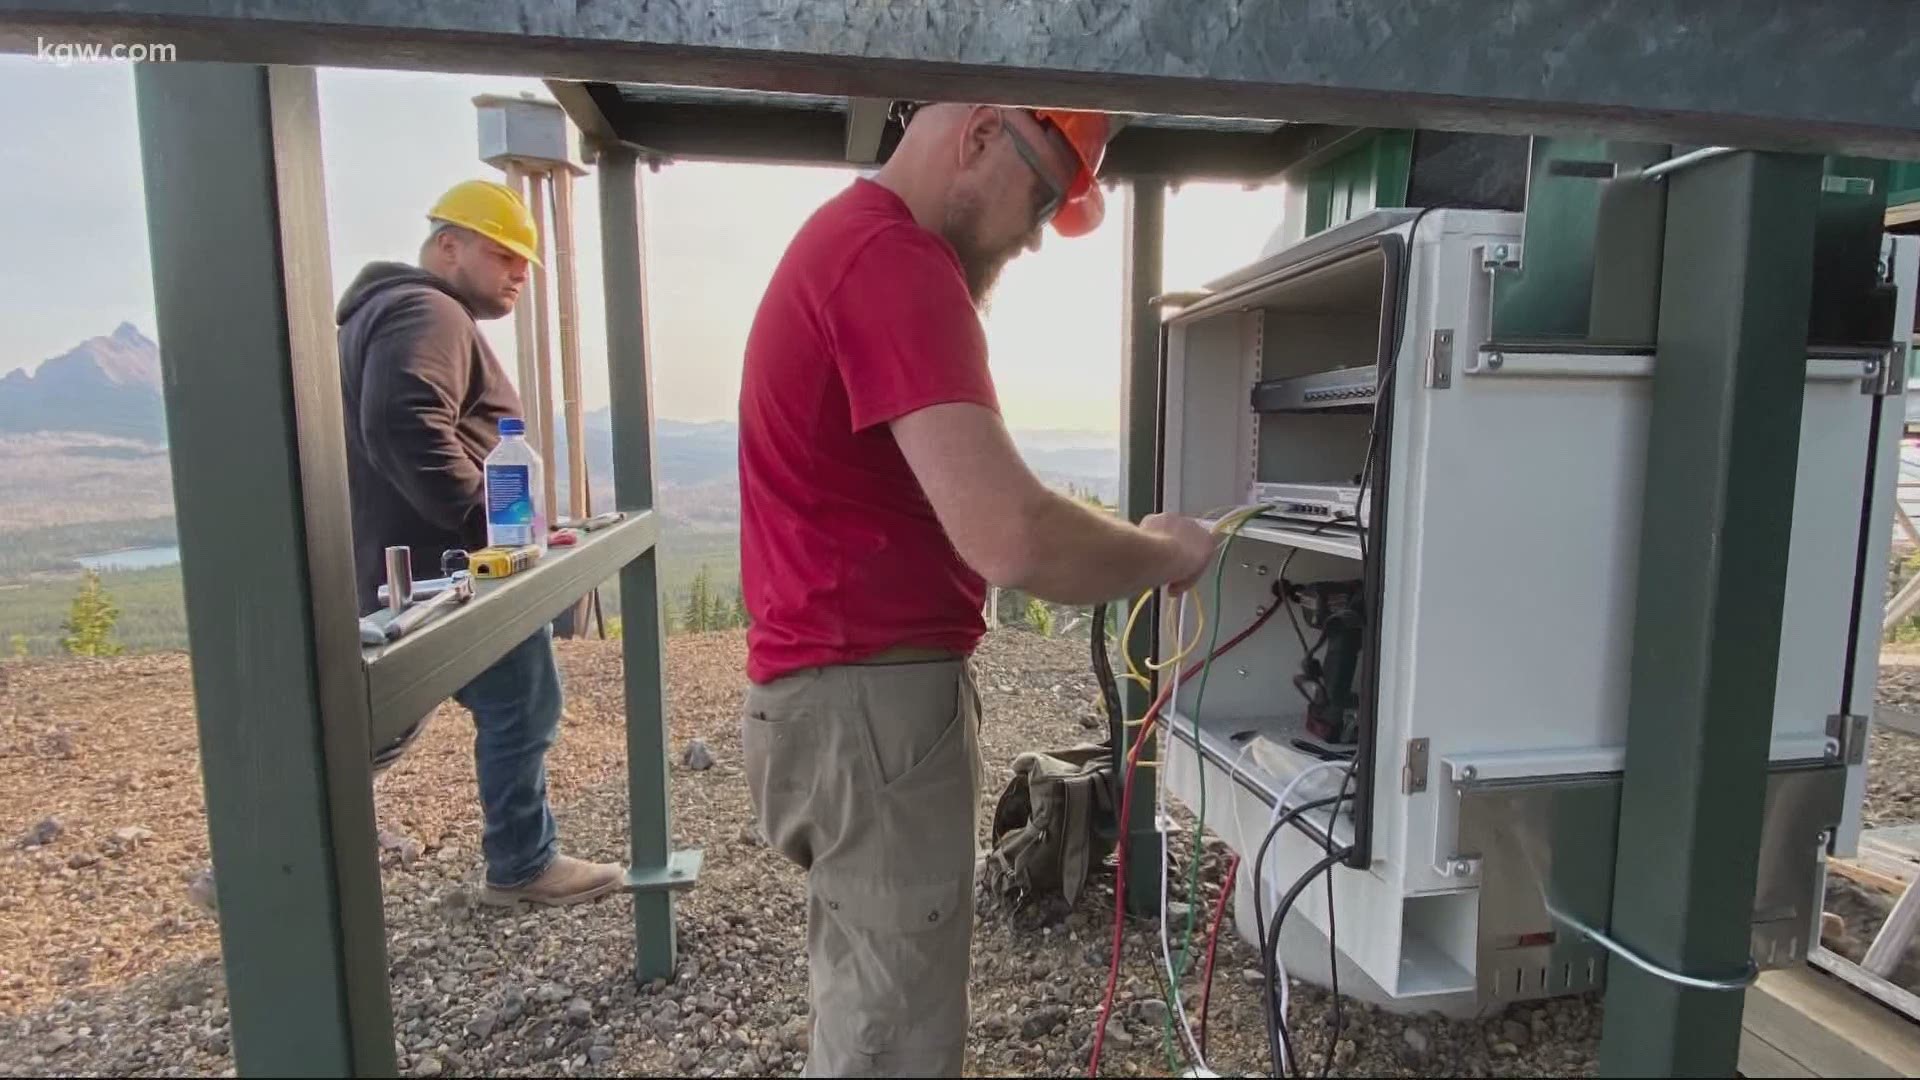 People recovering from wildfires in the McKenzie River Valley are getting help restoring internet service. Volunteers are also bringing back a sense of normalcy.